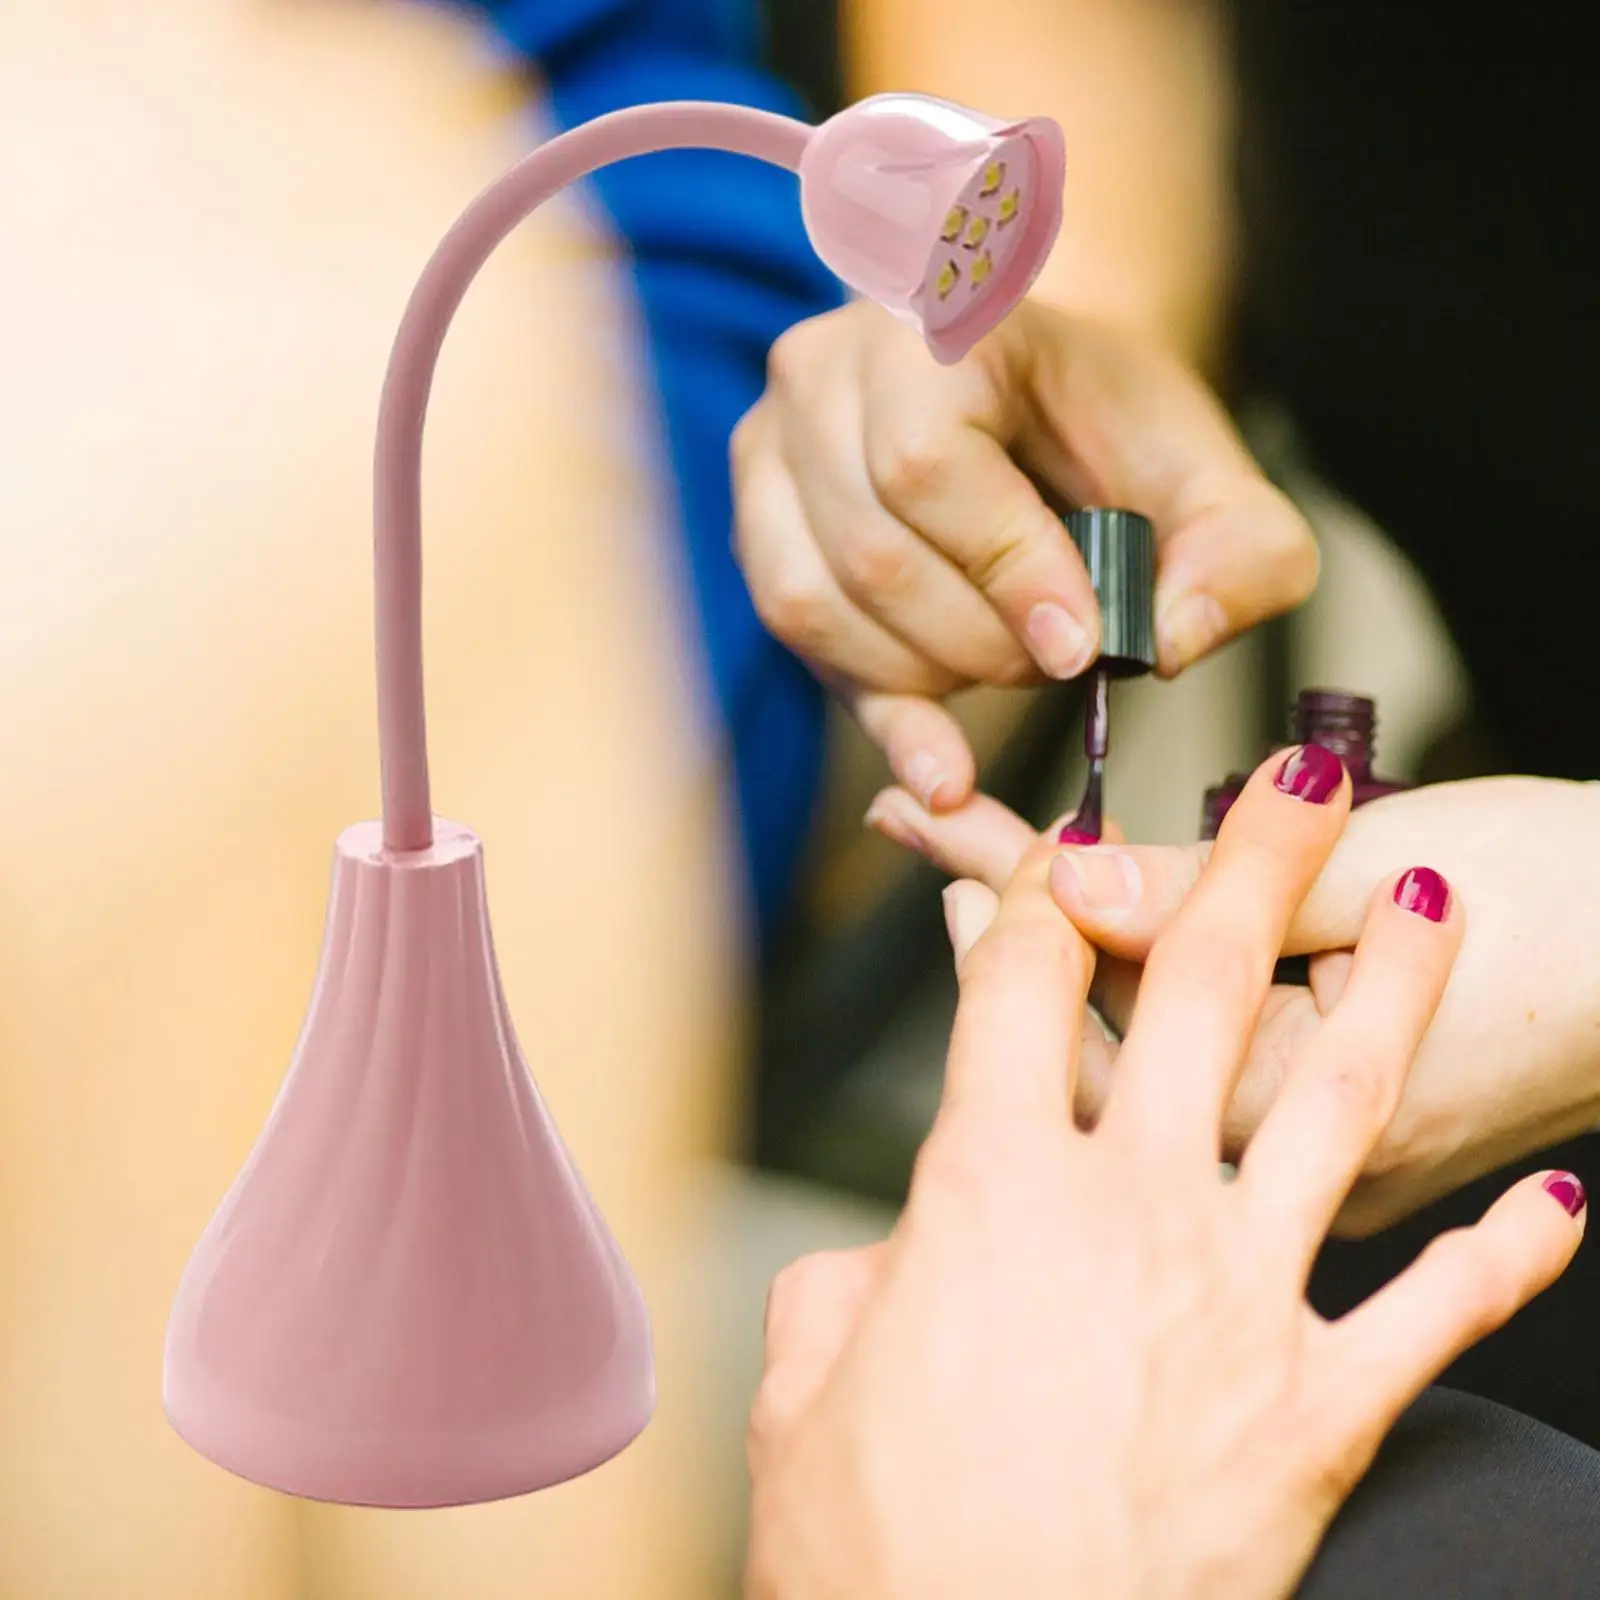 Portable Nail Lamp Lightweight Dryer Curing Gel Heating Light Nail Patch Toaster Lamp 360 Rotation 6 LEDs for Gel Nails Home